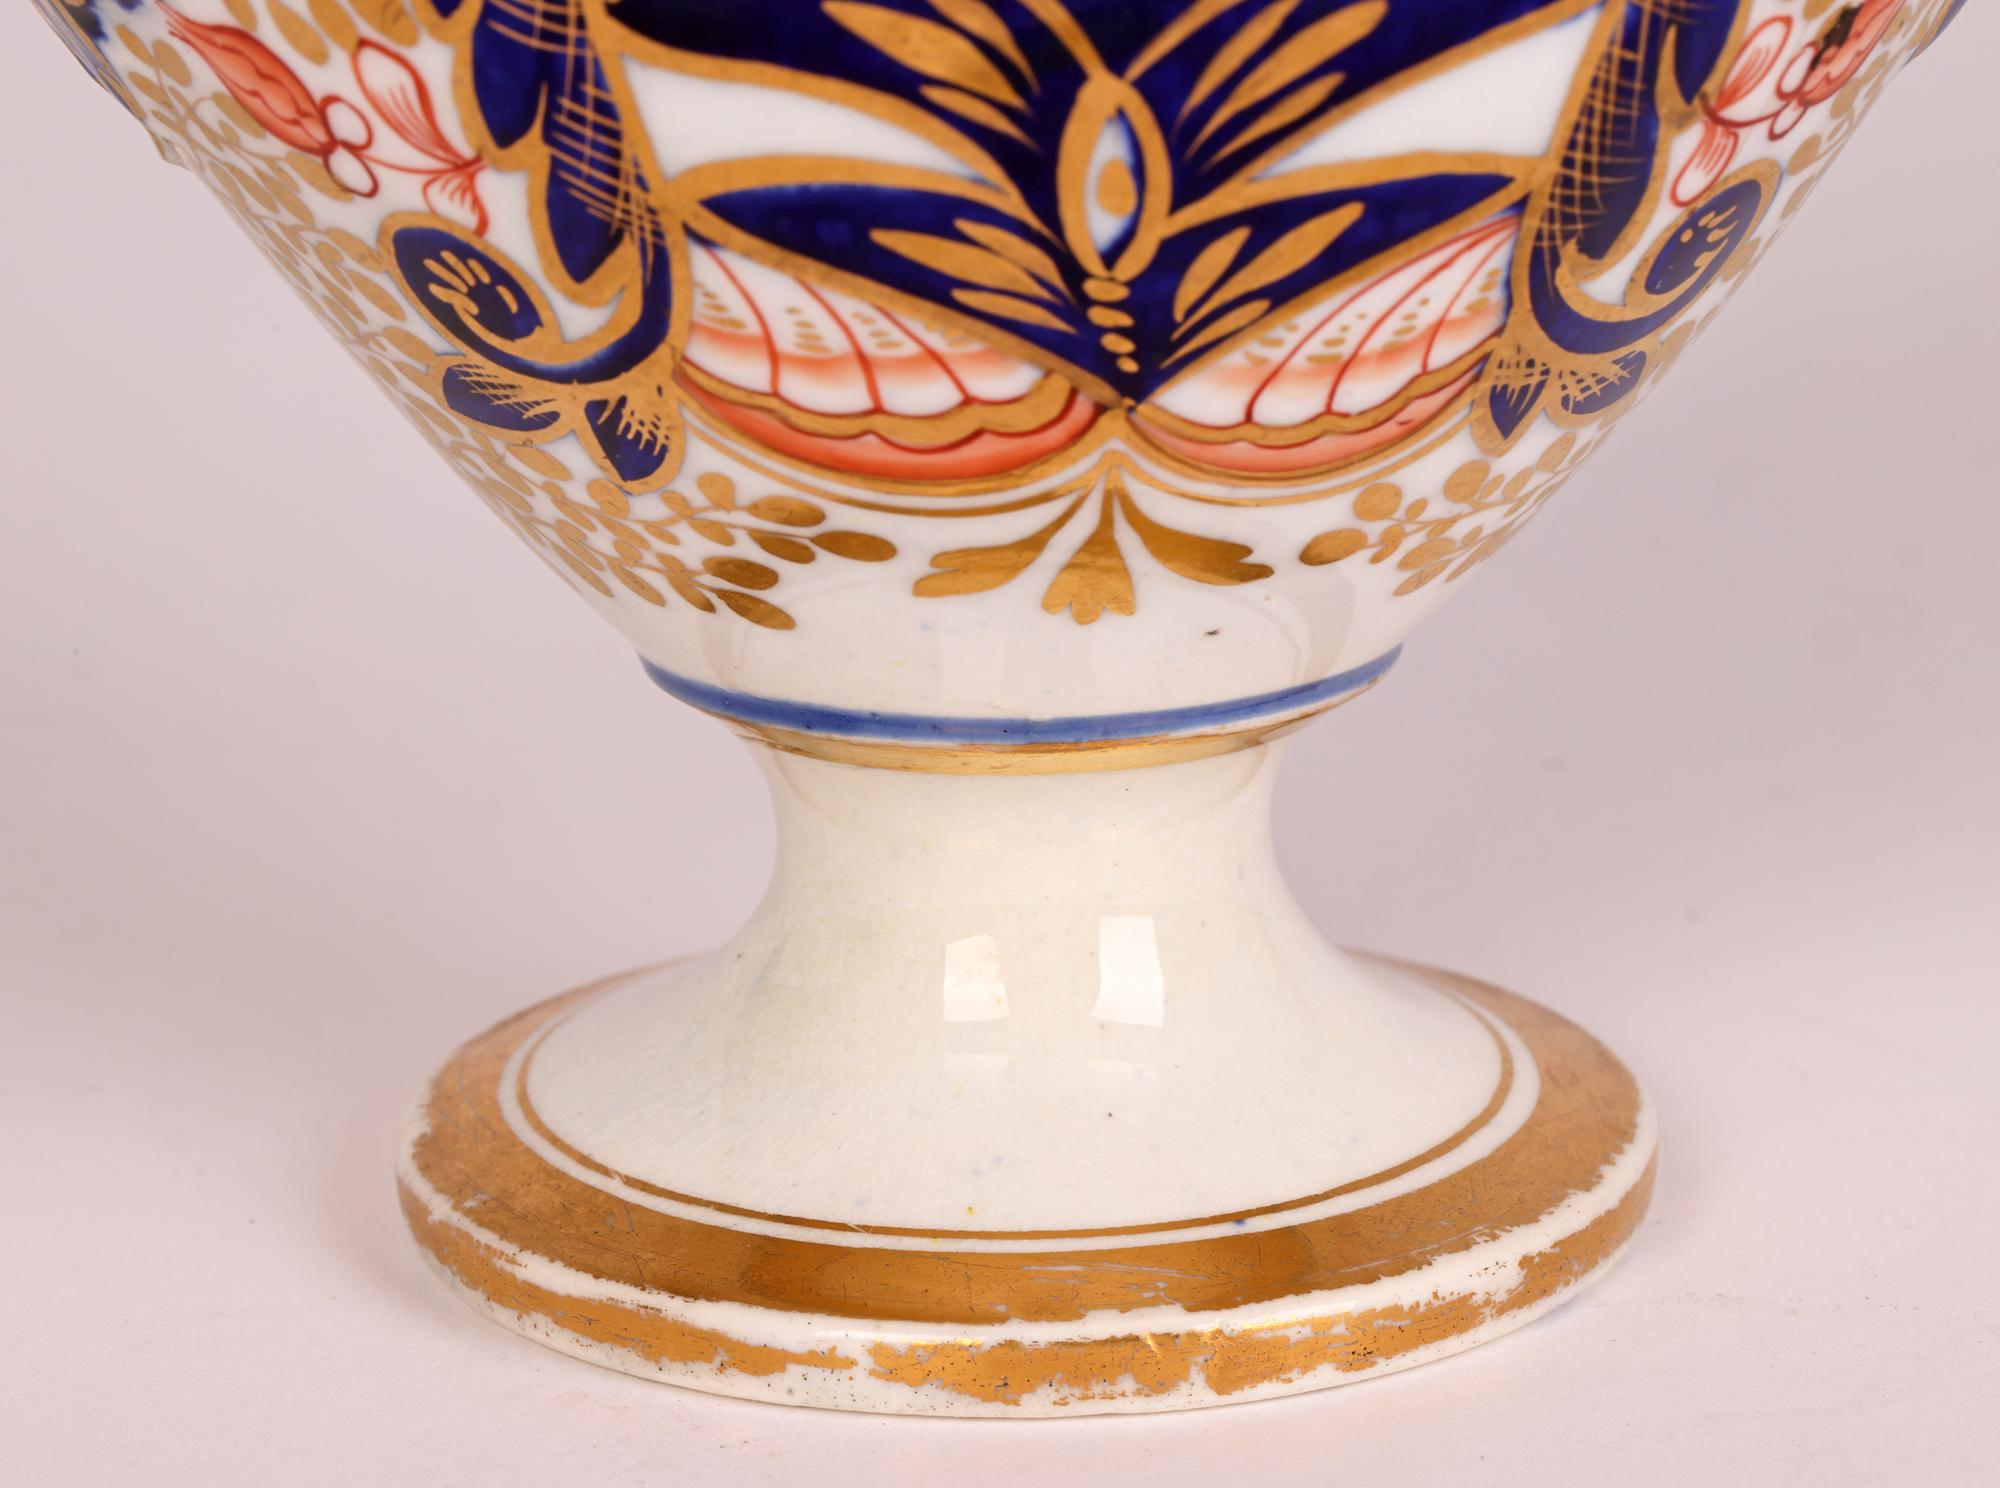 A very fine, rare and unusual antique English Derby partners porcelain inkwell and quill pen holder decorated in the Imari pattern and dating from the early 19th century. The pen and inkwell stands on a narrow round pedestal domed foot with a narrow